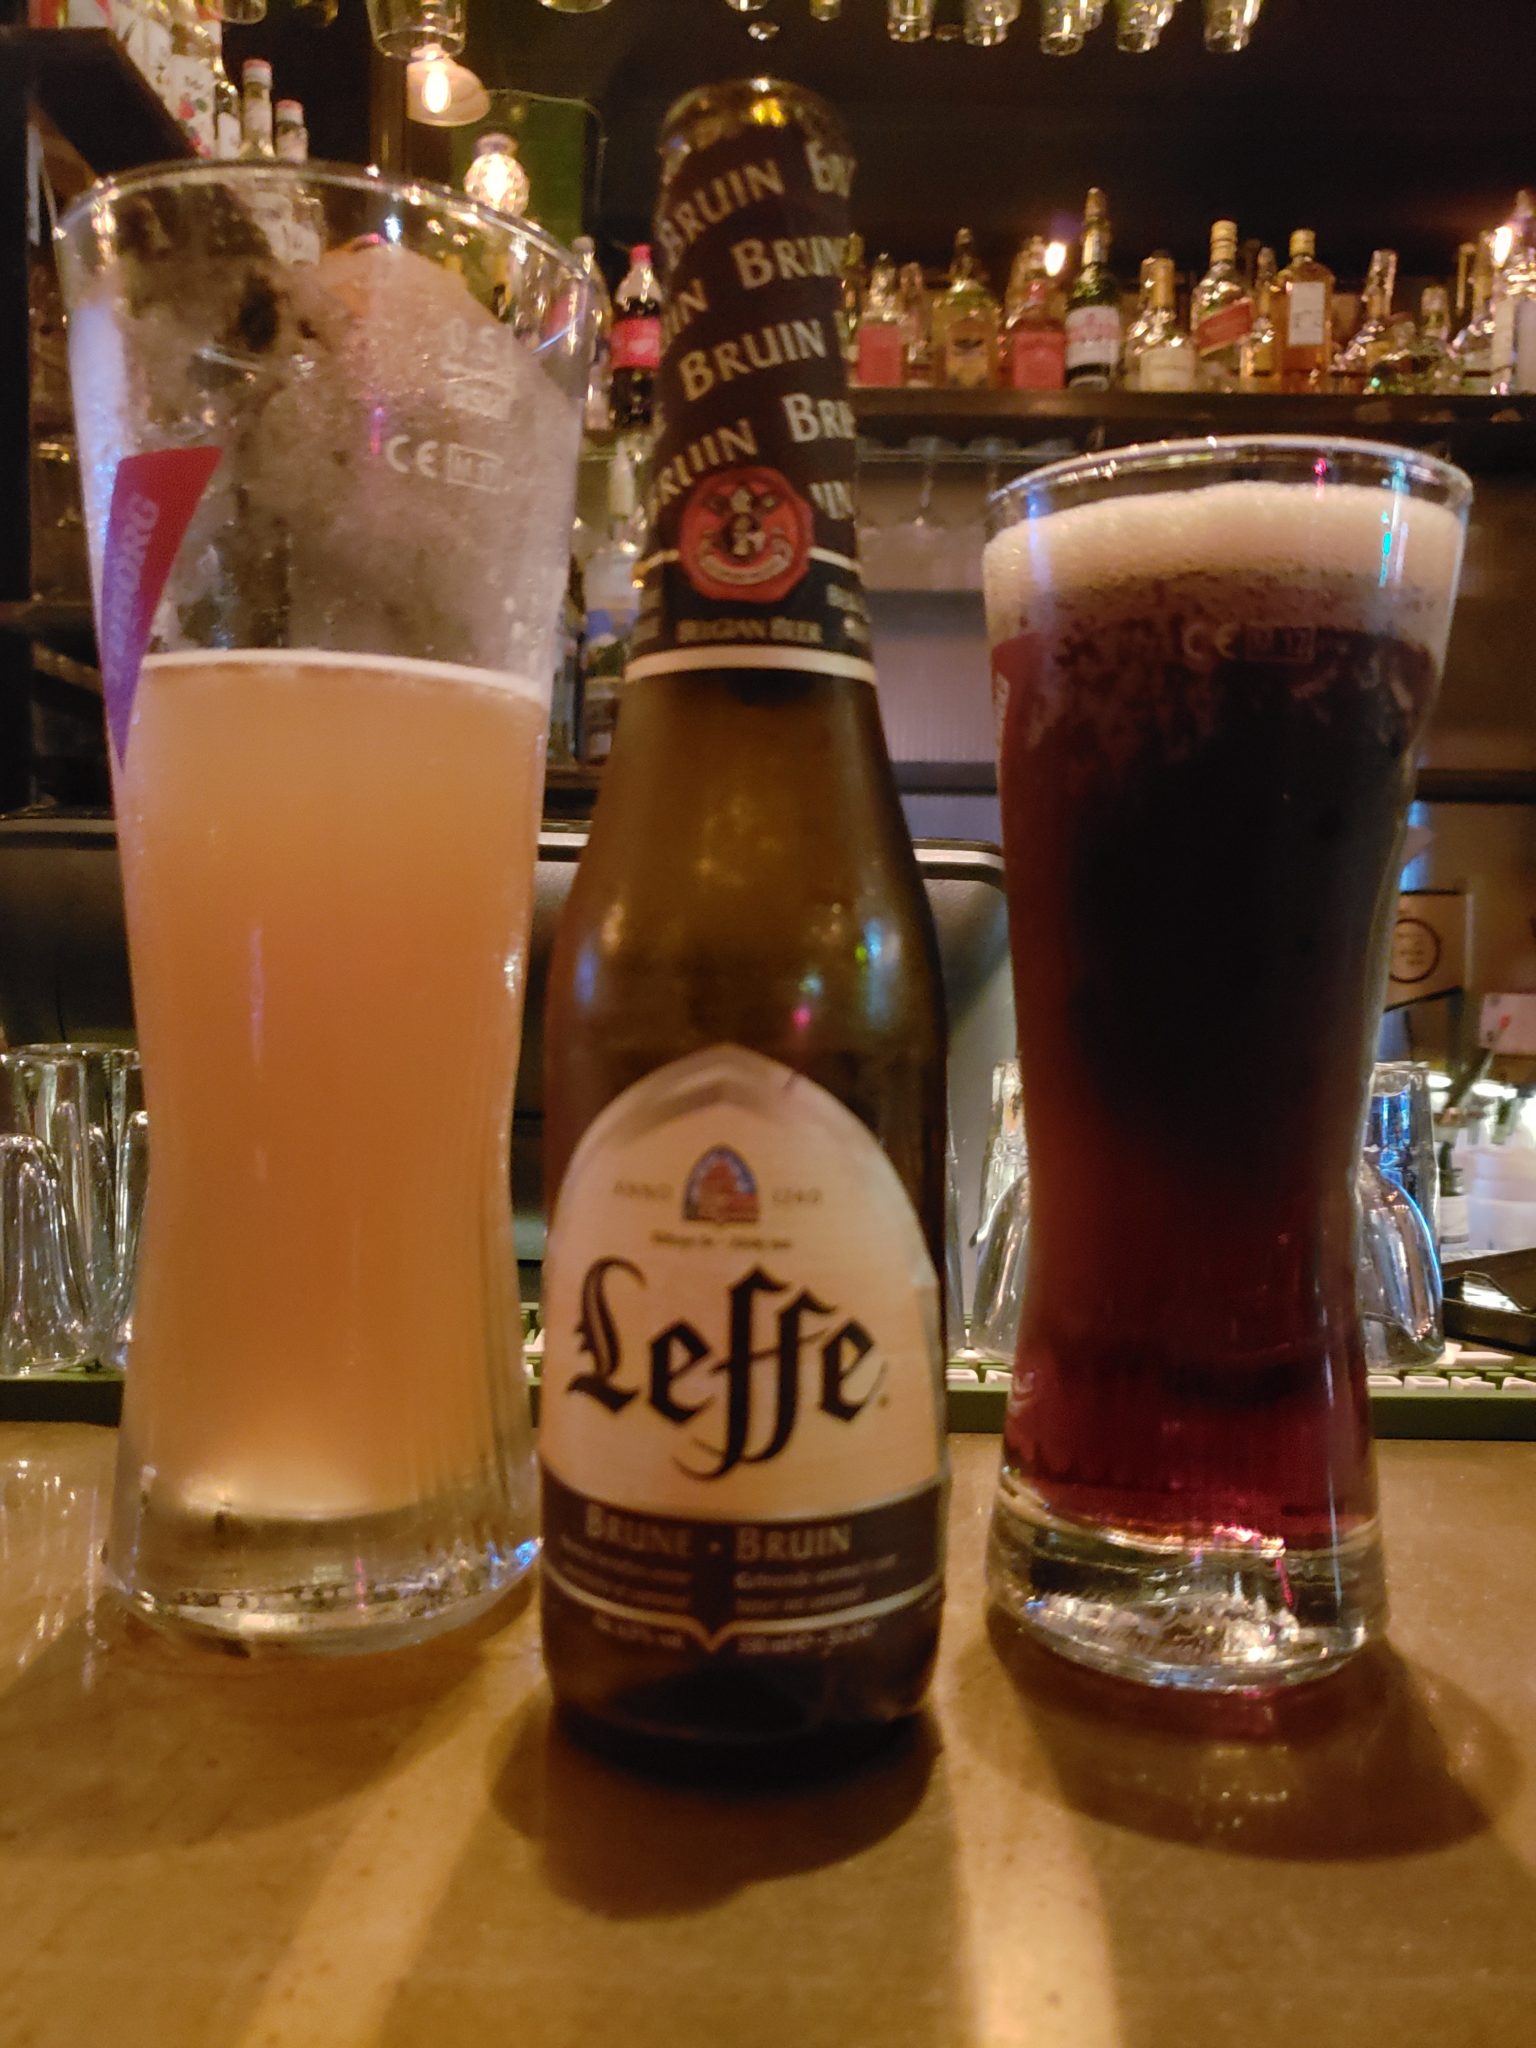 a bottle of beer next to a glass of beer